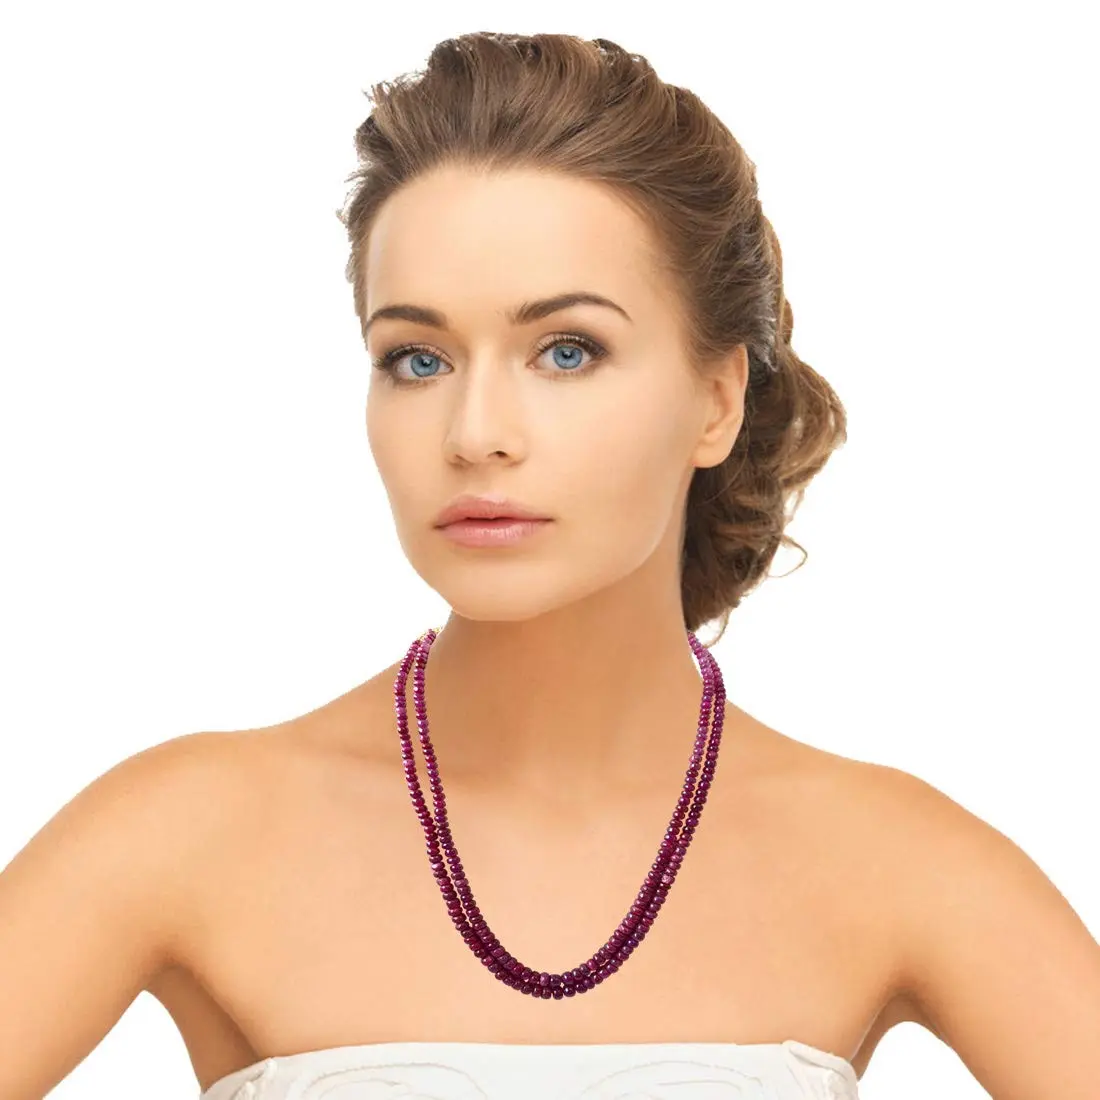 341.24cts 2 Line Real Red Ruby Beads Necklace for Women (341.24ctsRubyNeck)